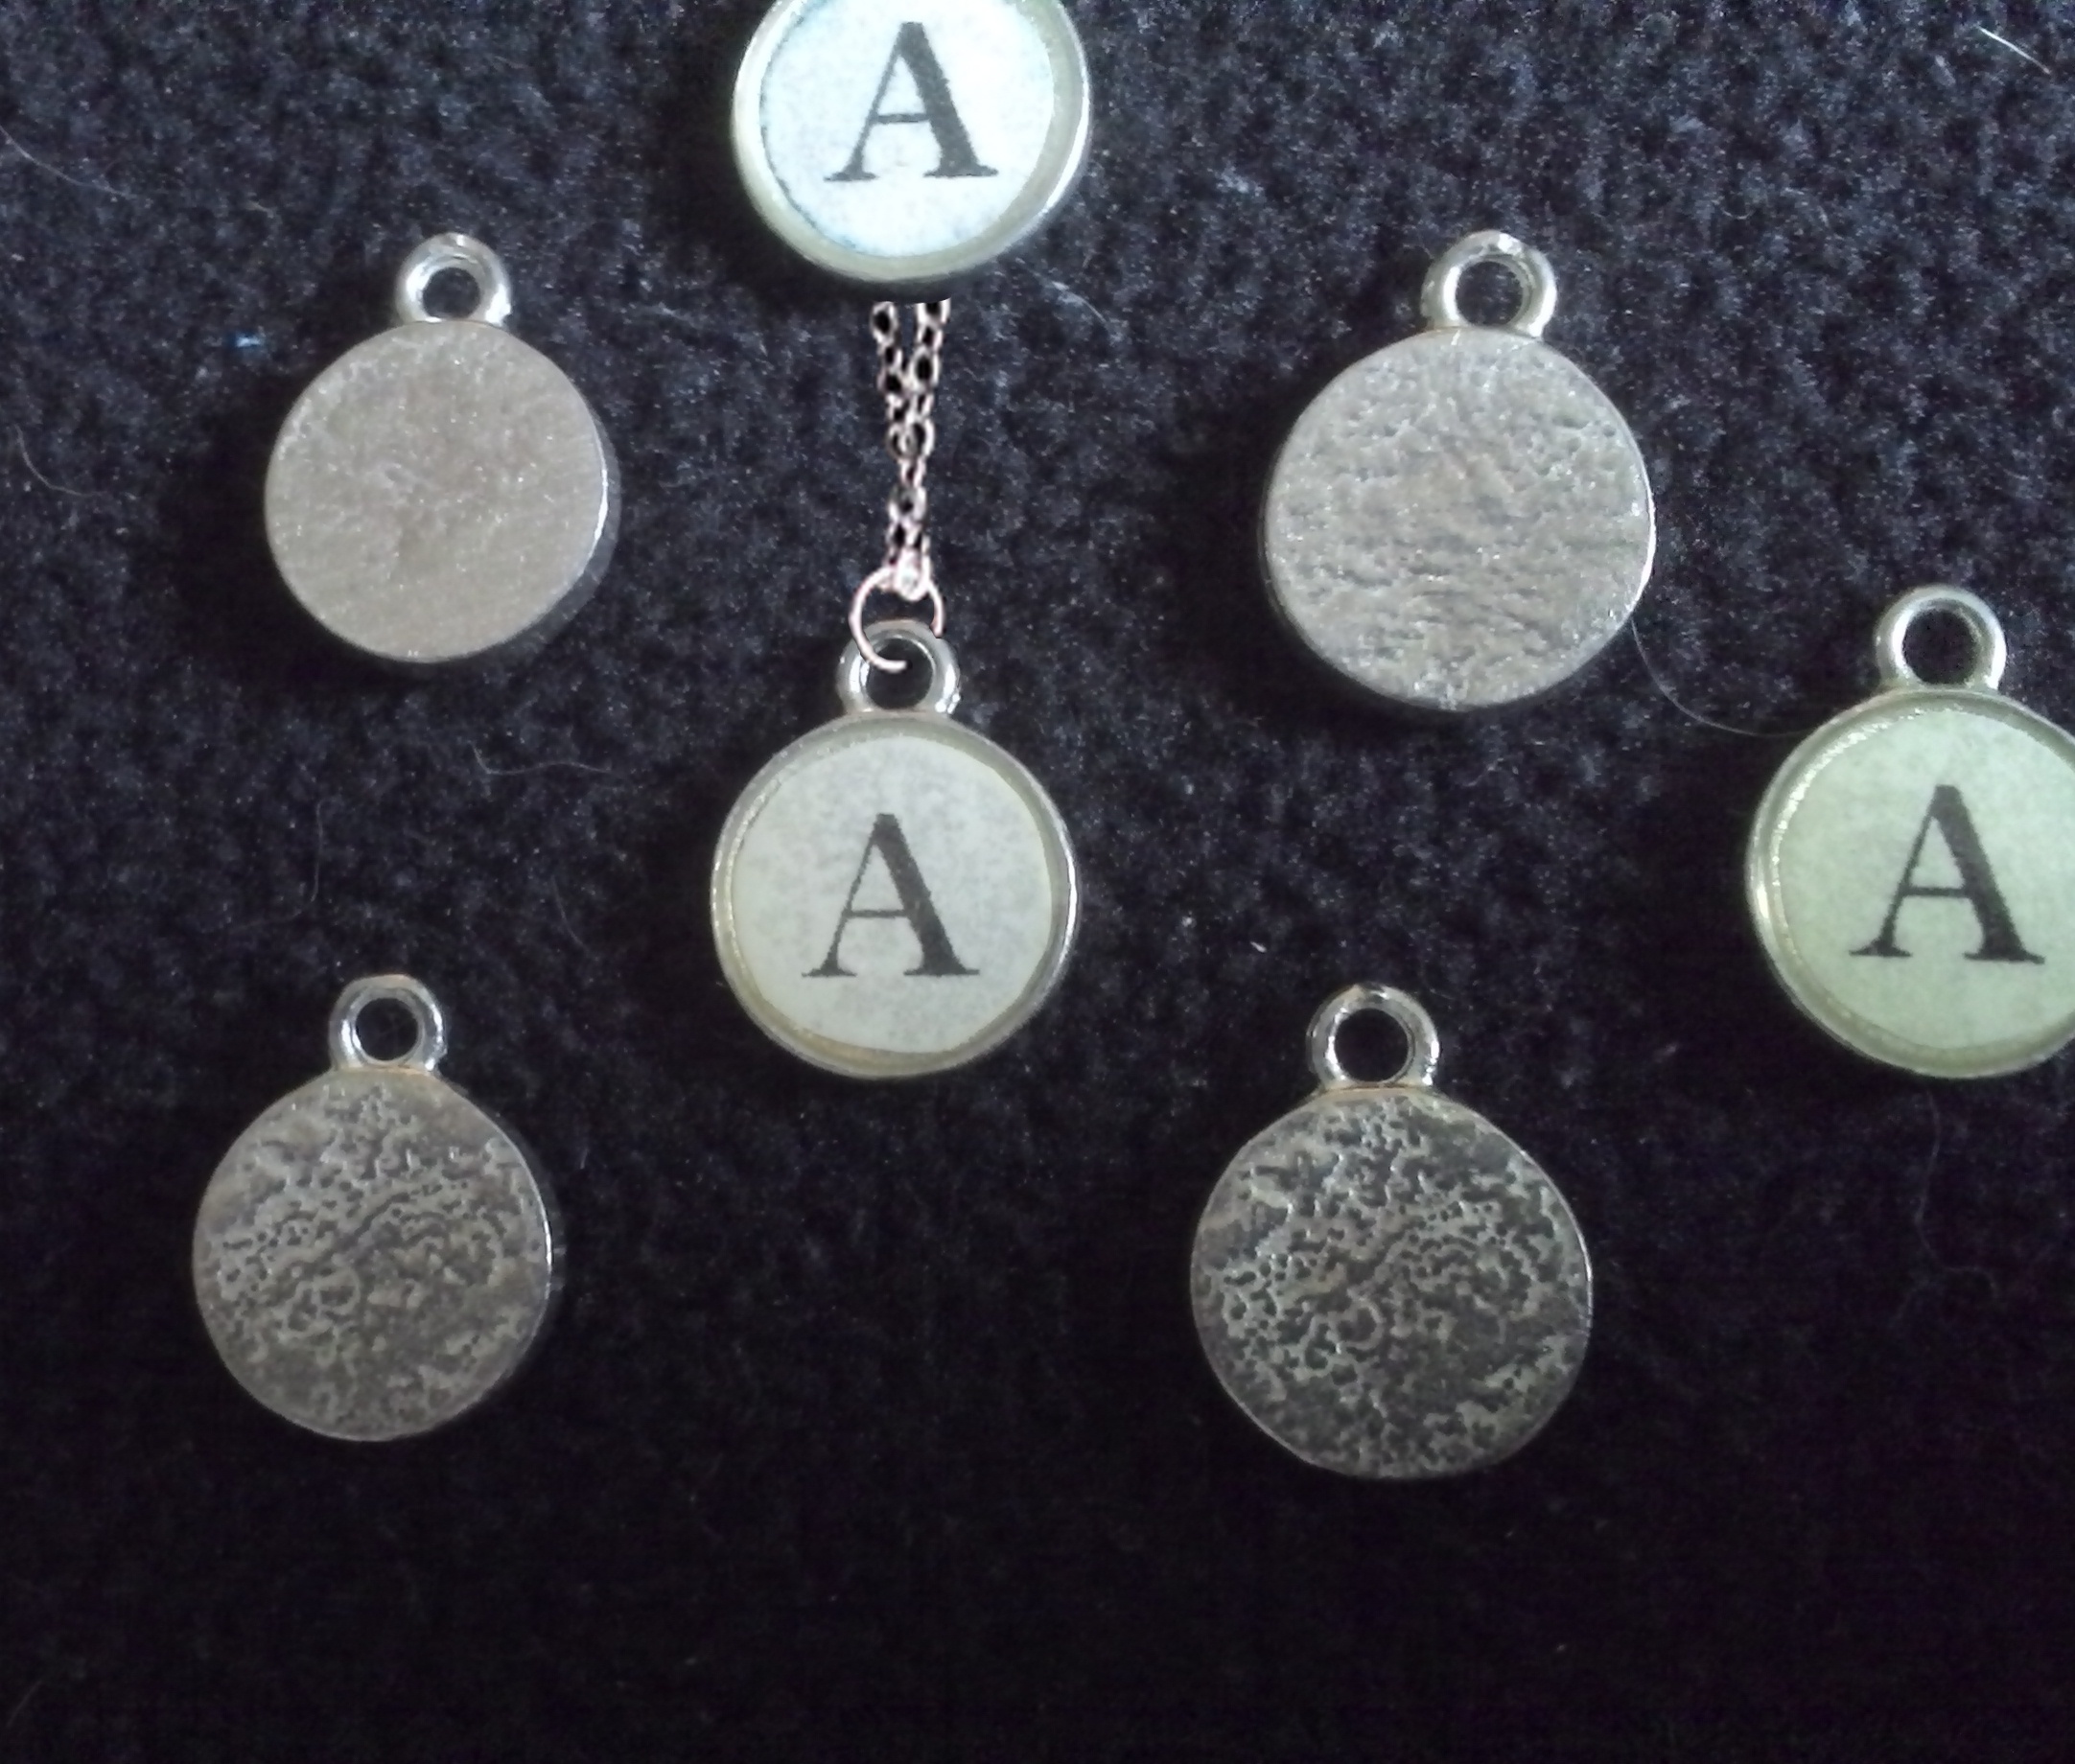 Steampunk Typewriter Key Pewter Pendant with Letter A